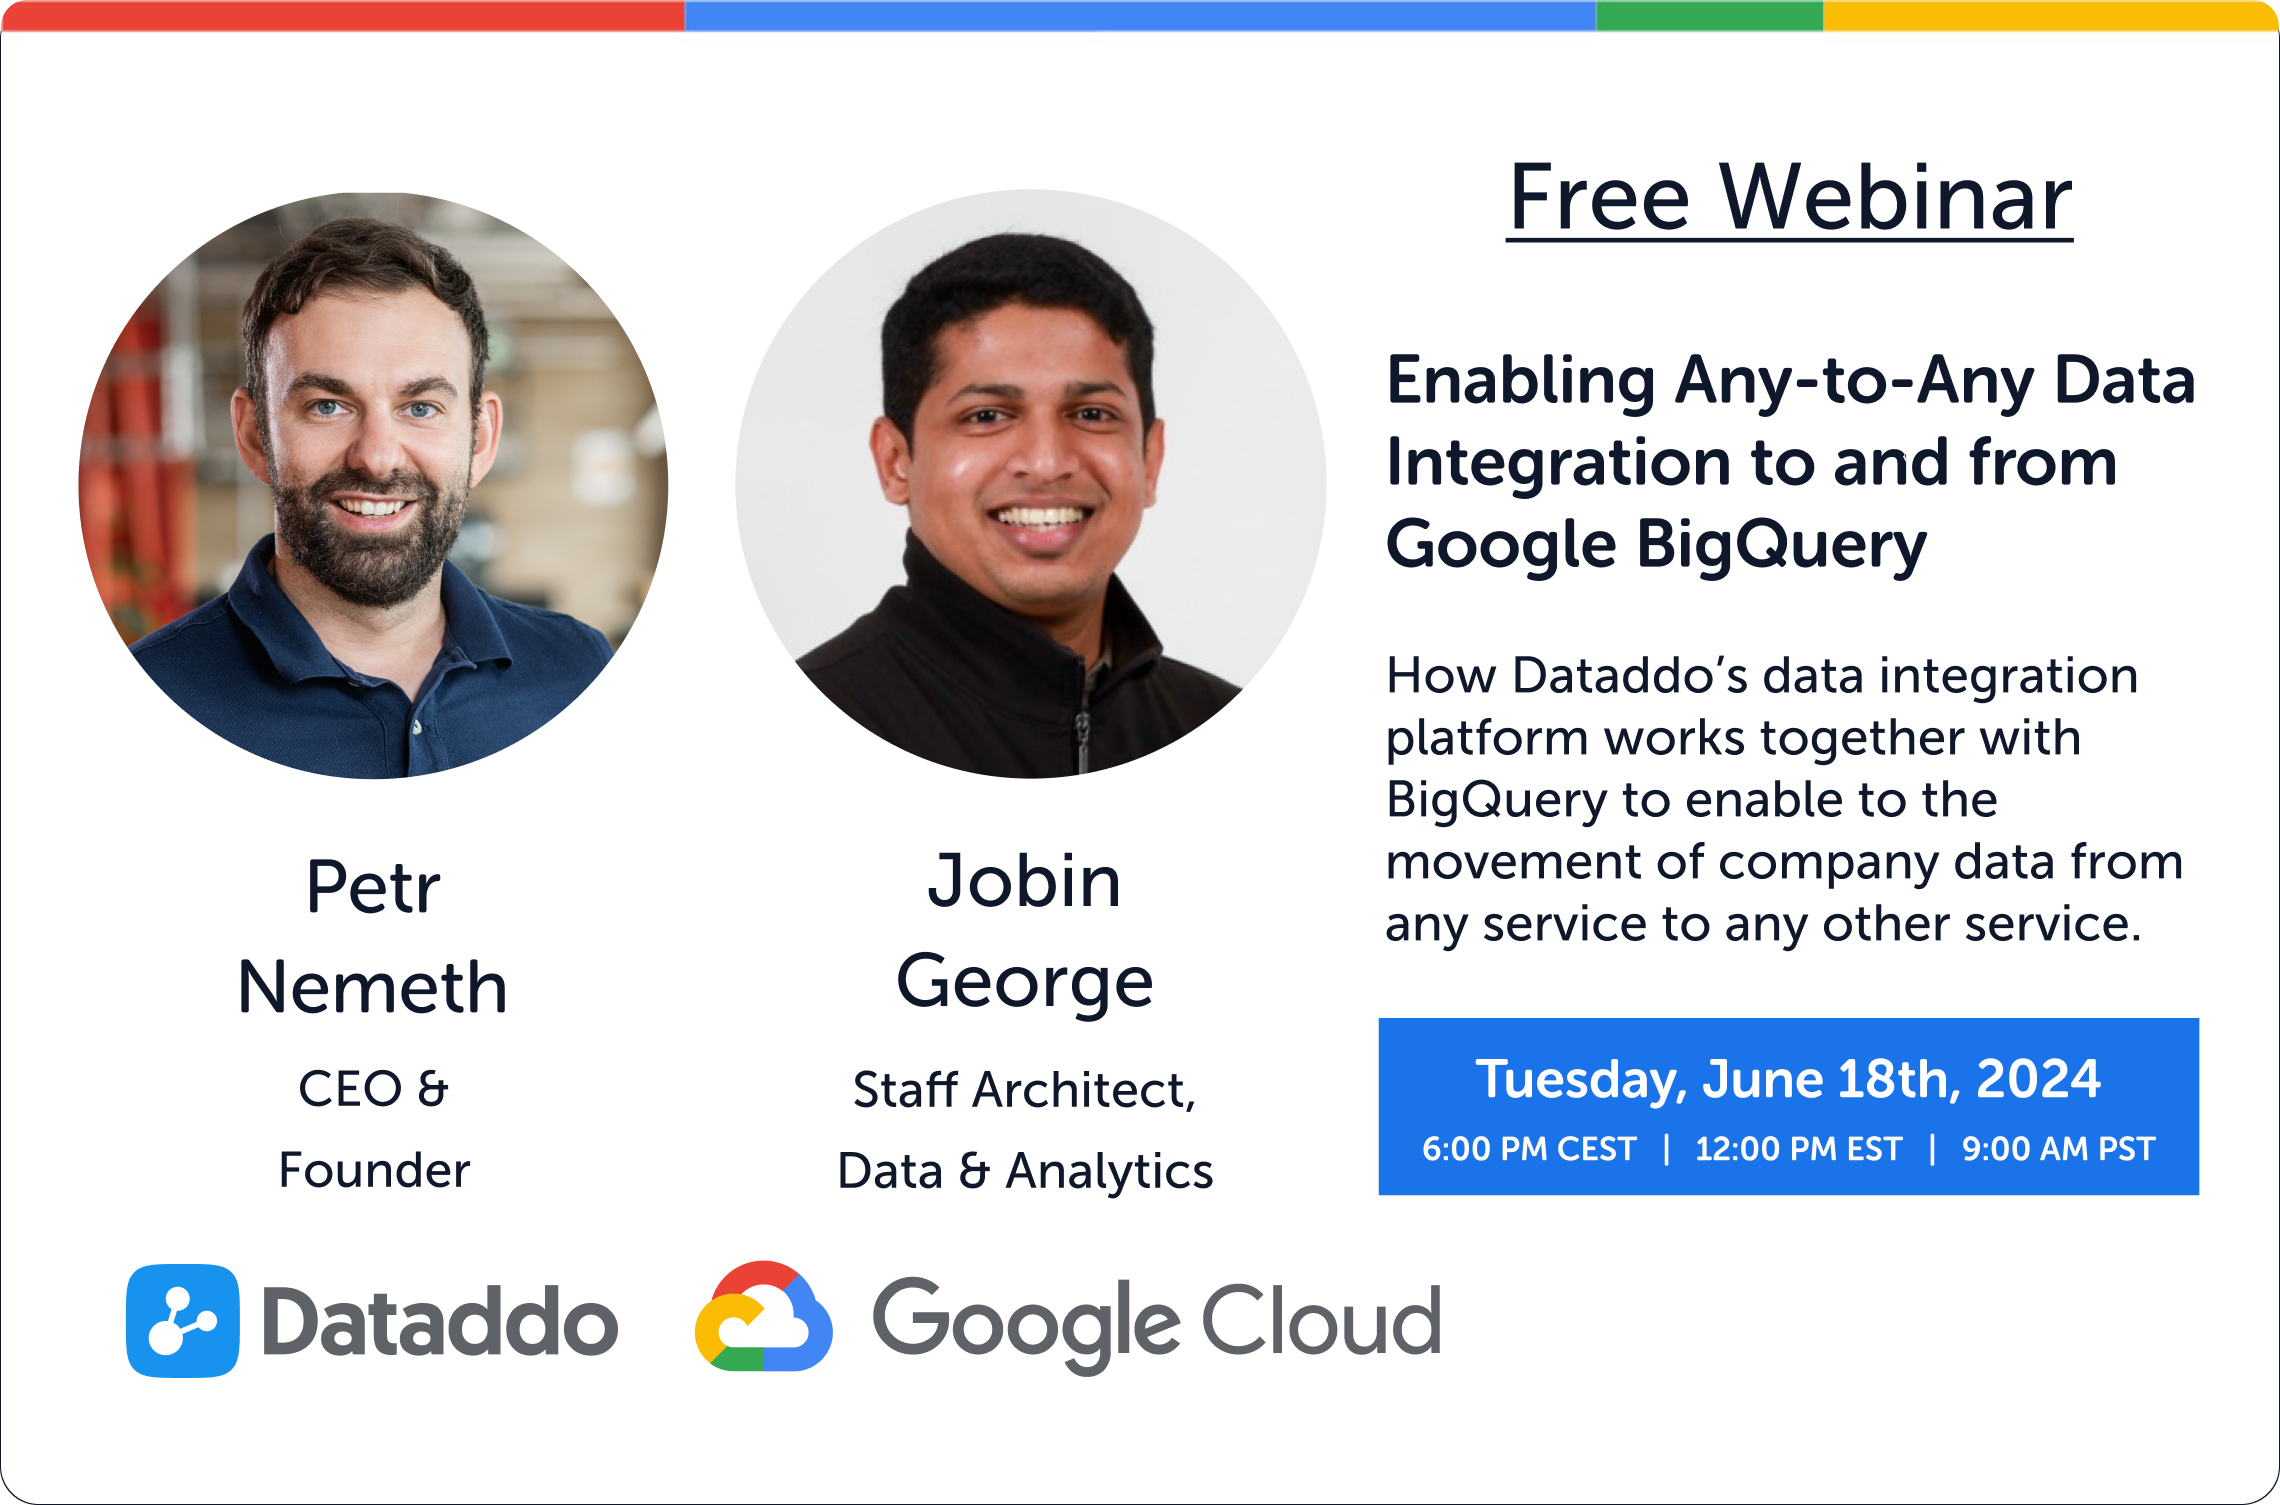 [UPCOMING WEBINAR] Enabling Any-to-Any Data Integration to and from Google BigQuery